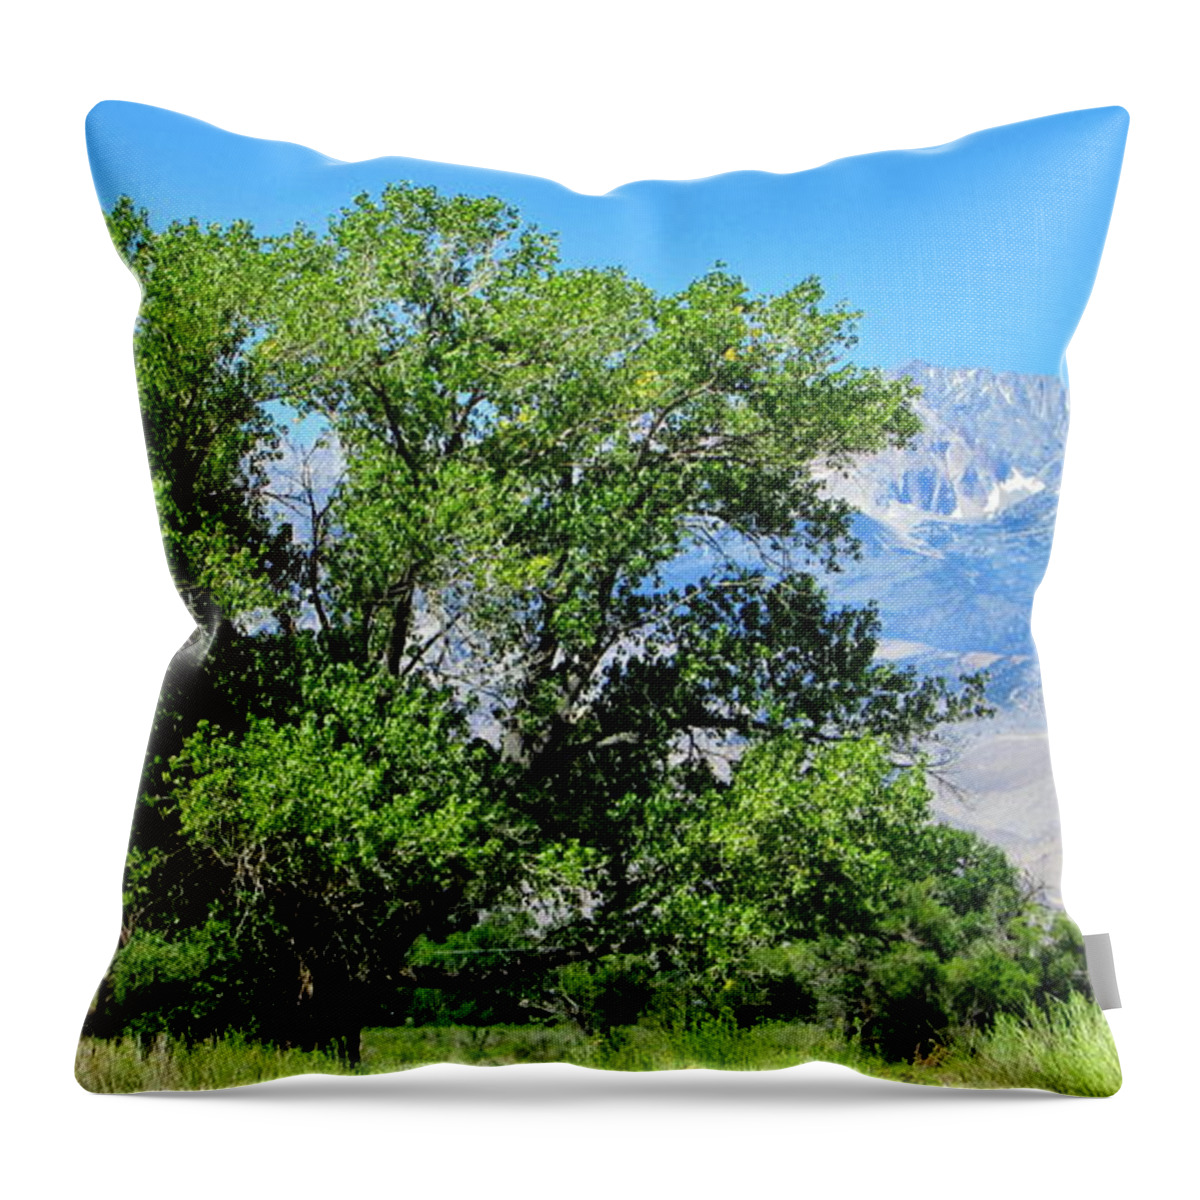 Sky Throw Pillow featuring the photograph Looming by Marilyn Diaz